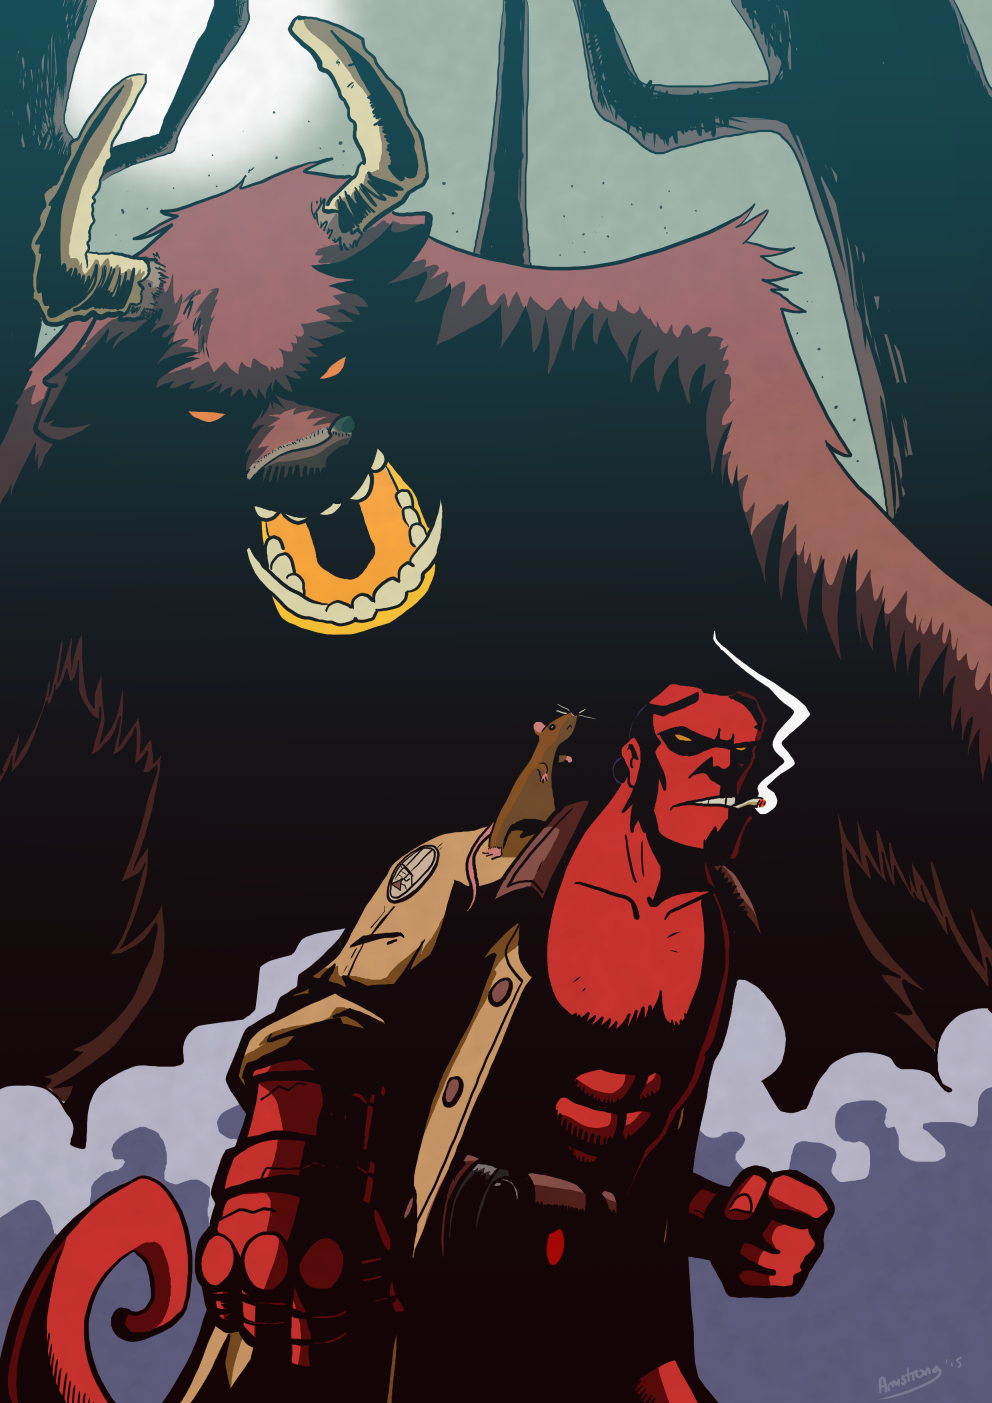 Hellboy and the little brown mouse face off against the Gruffalo